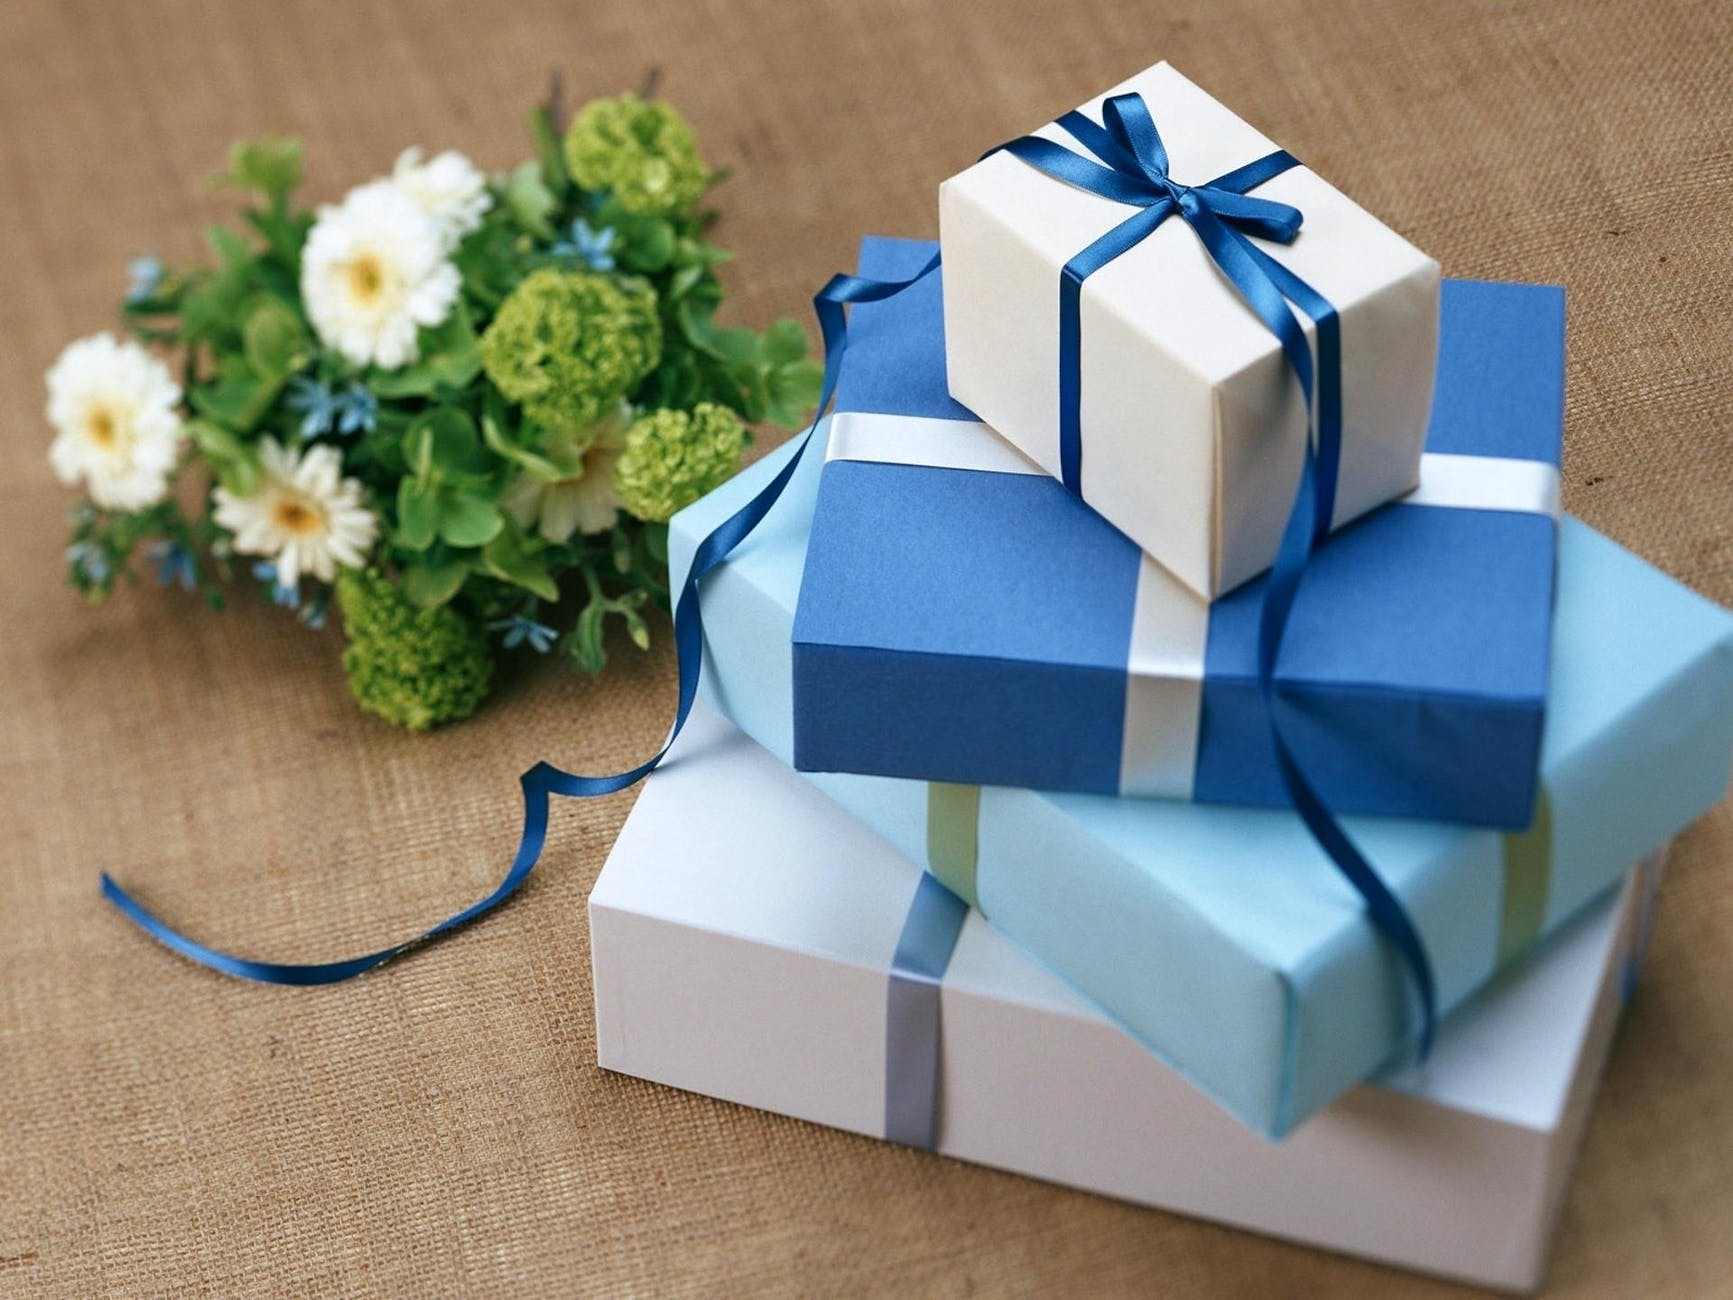 Smart Gift Approaches to Enchant Your Wife on Her Birthday